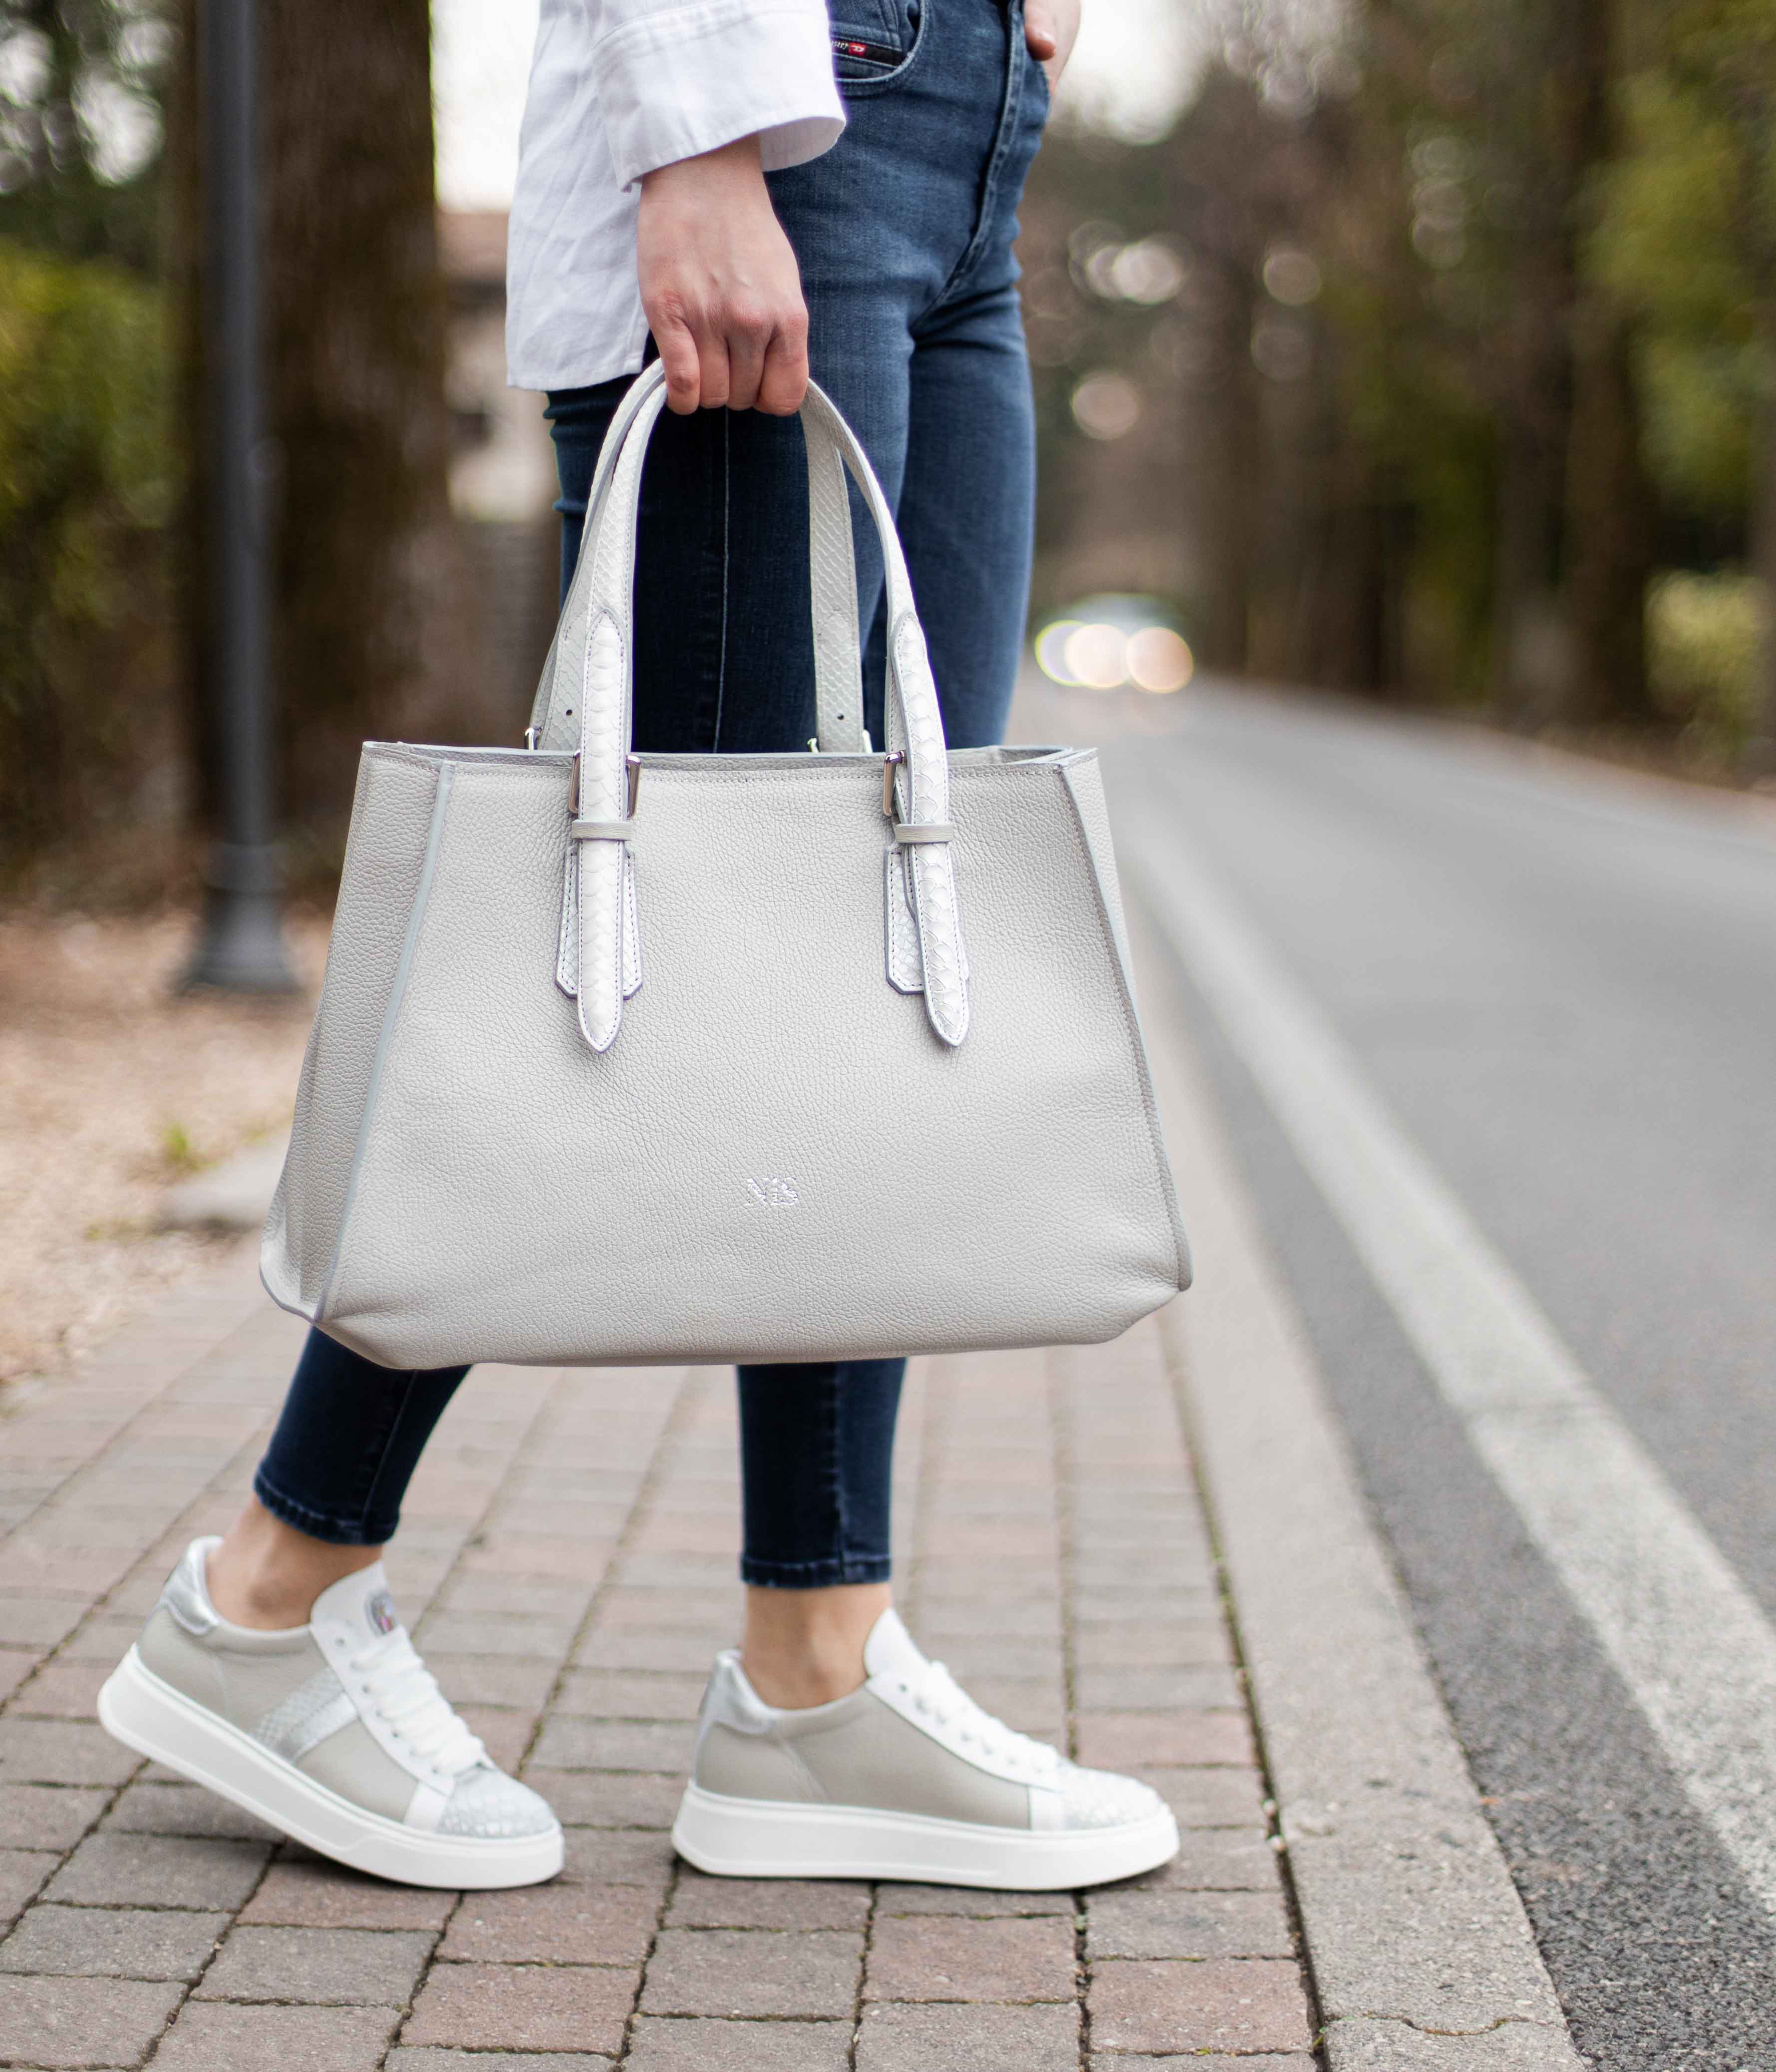 New Bags: The Purses, Totes, & Handbags to Get This May 2022